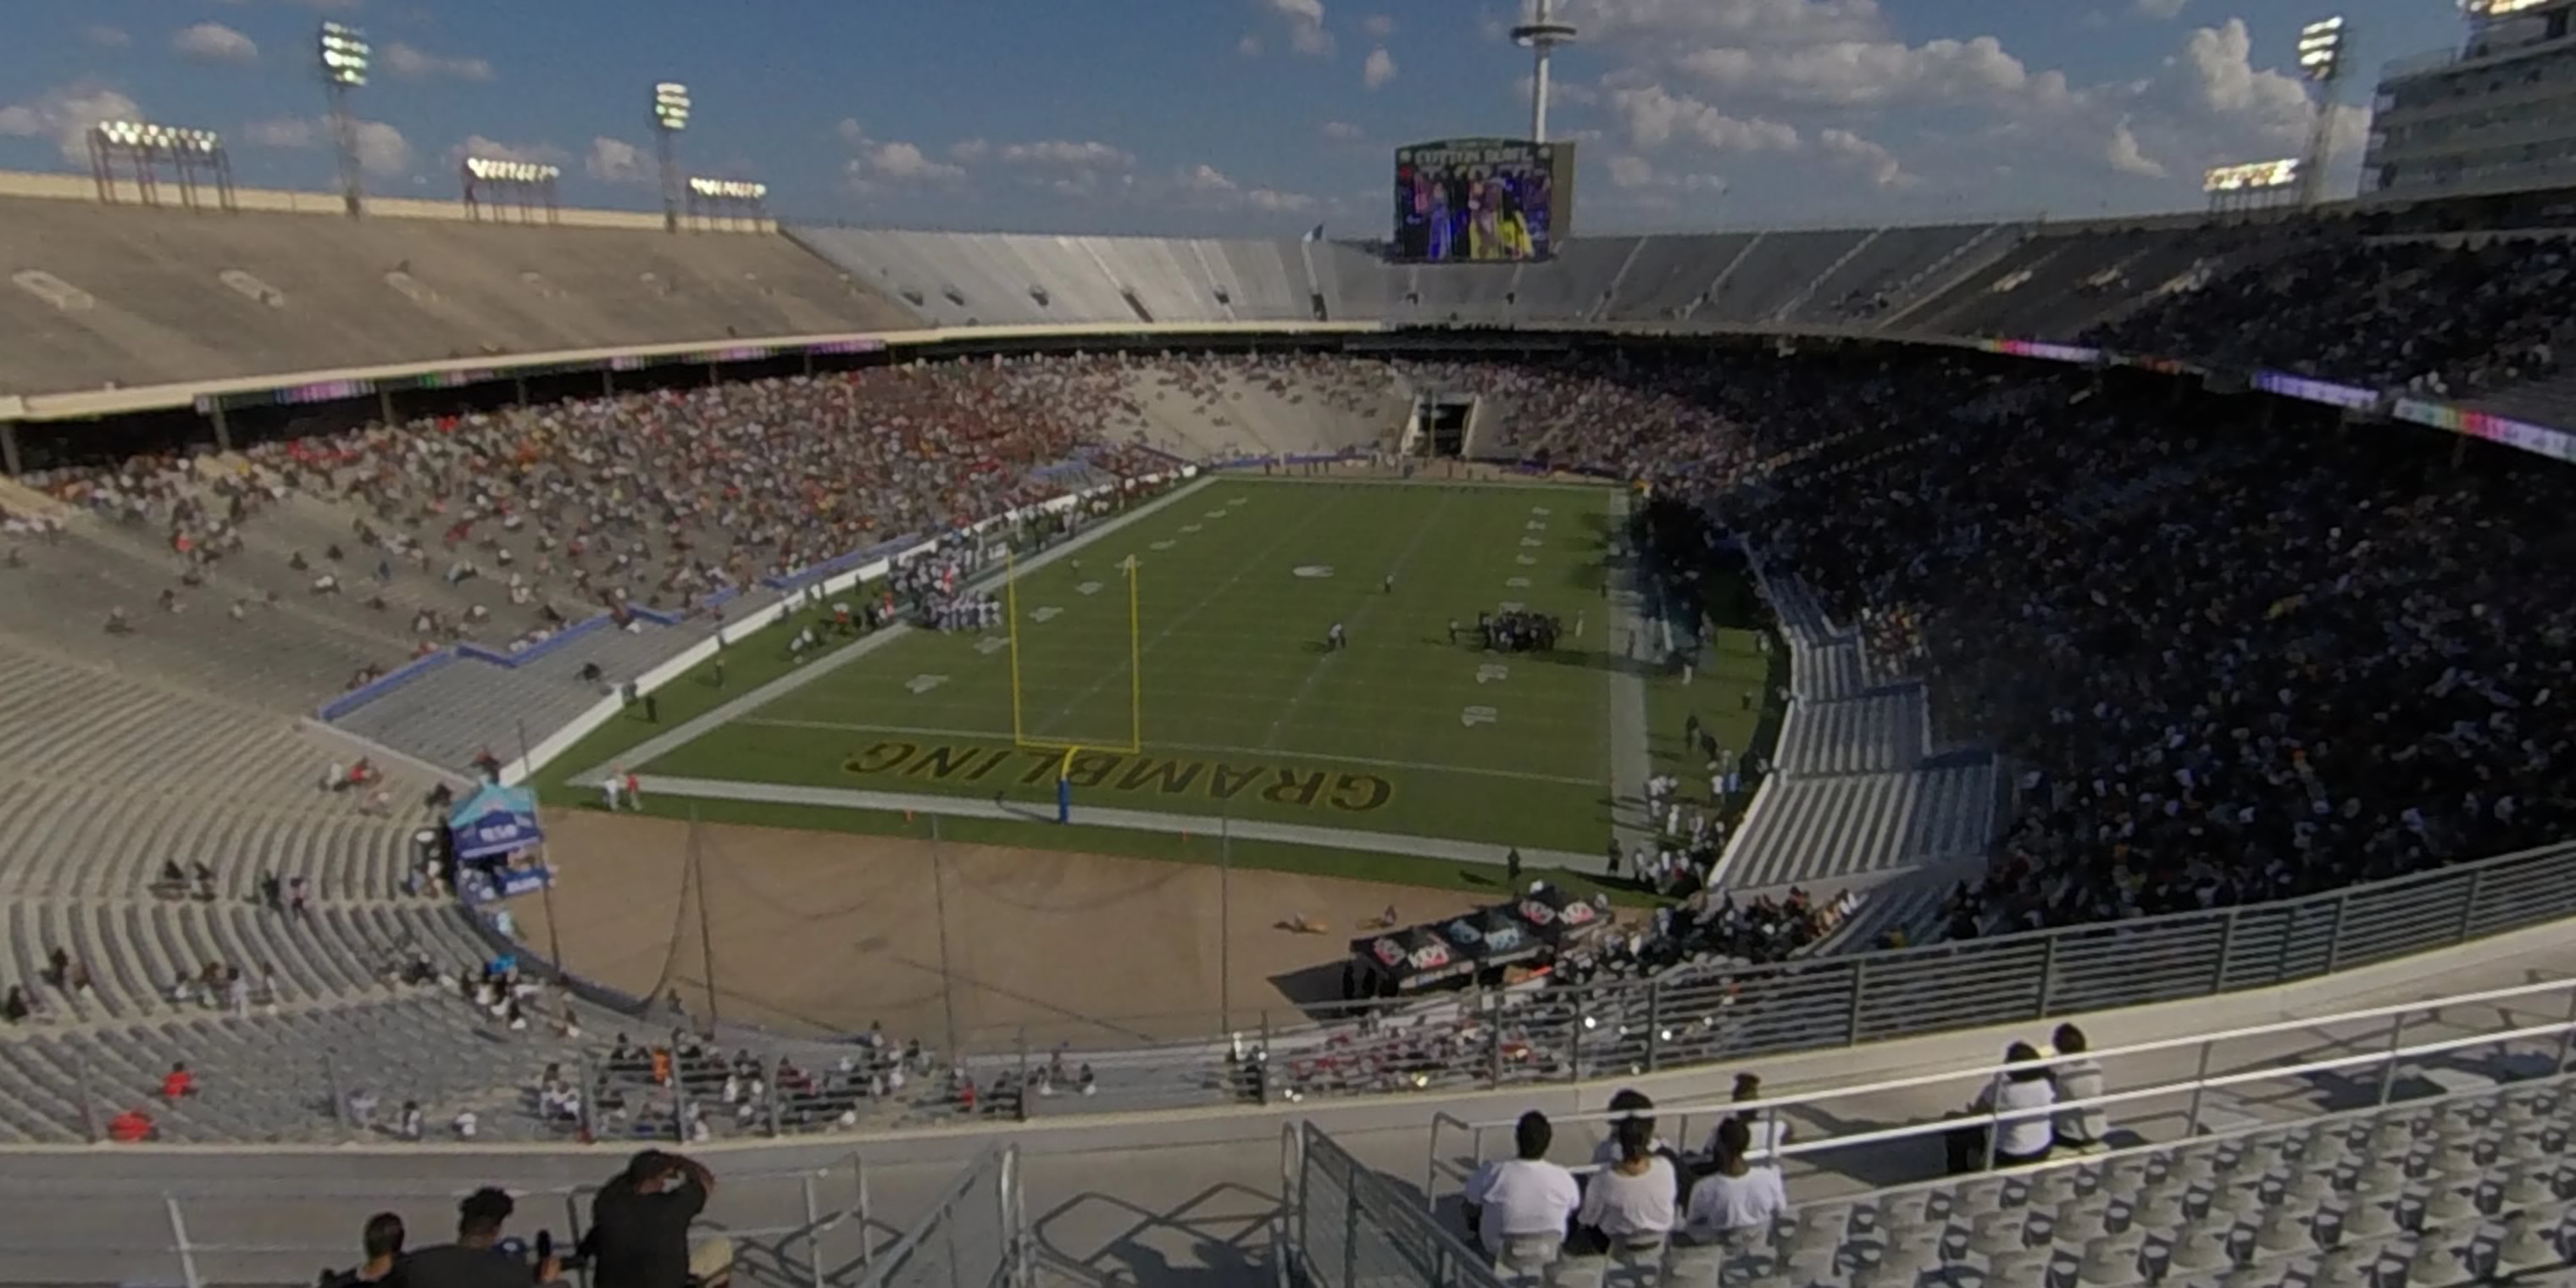 section 115 panoramic seat view  - cotton bowl